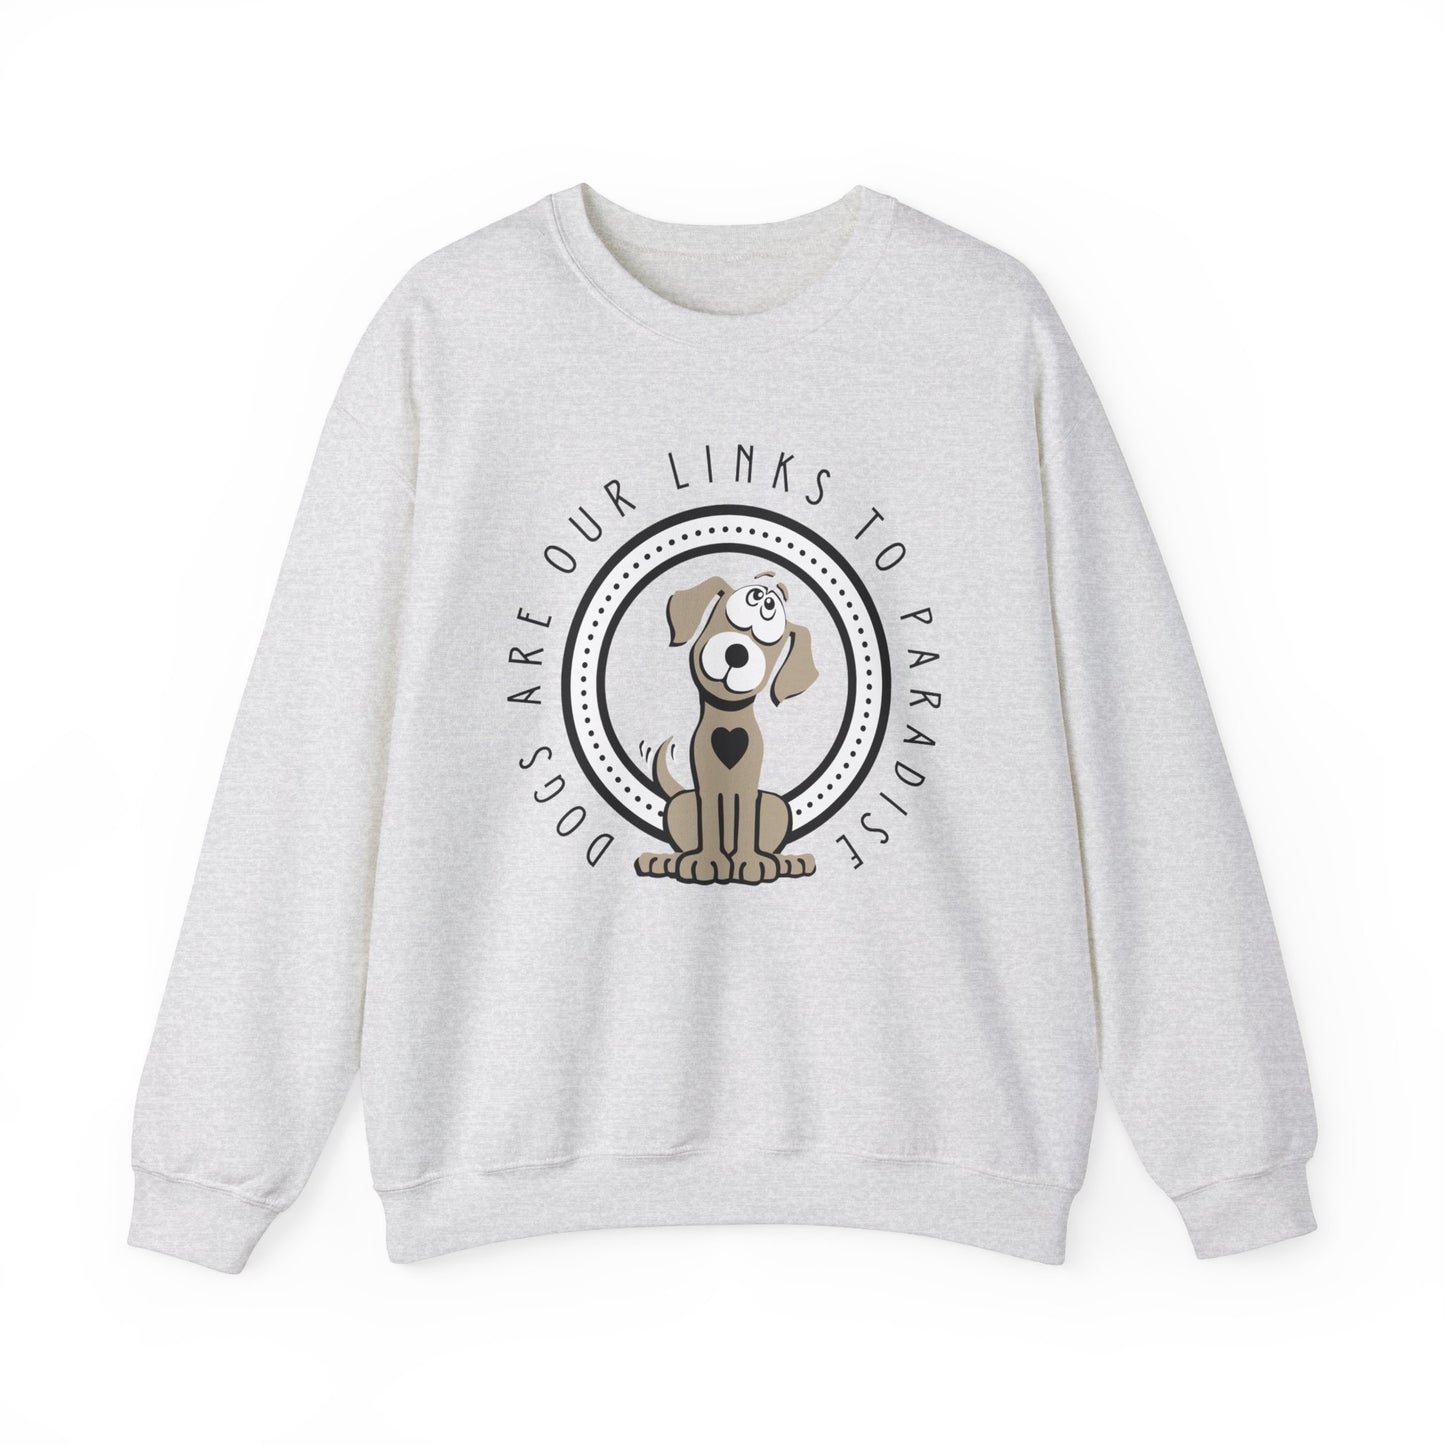  Introducing an ash-colored Dogs Pure Love design, showcasing the 'Dogs are Paradise' print, set against a crisp white background.